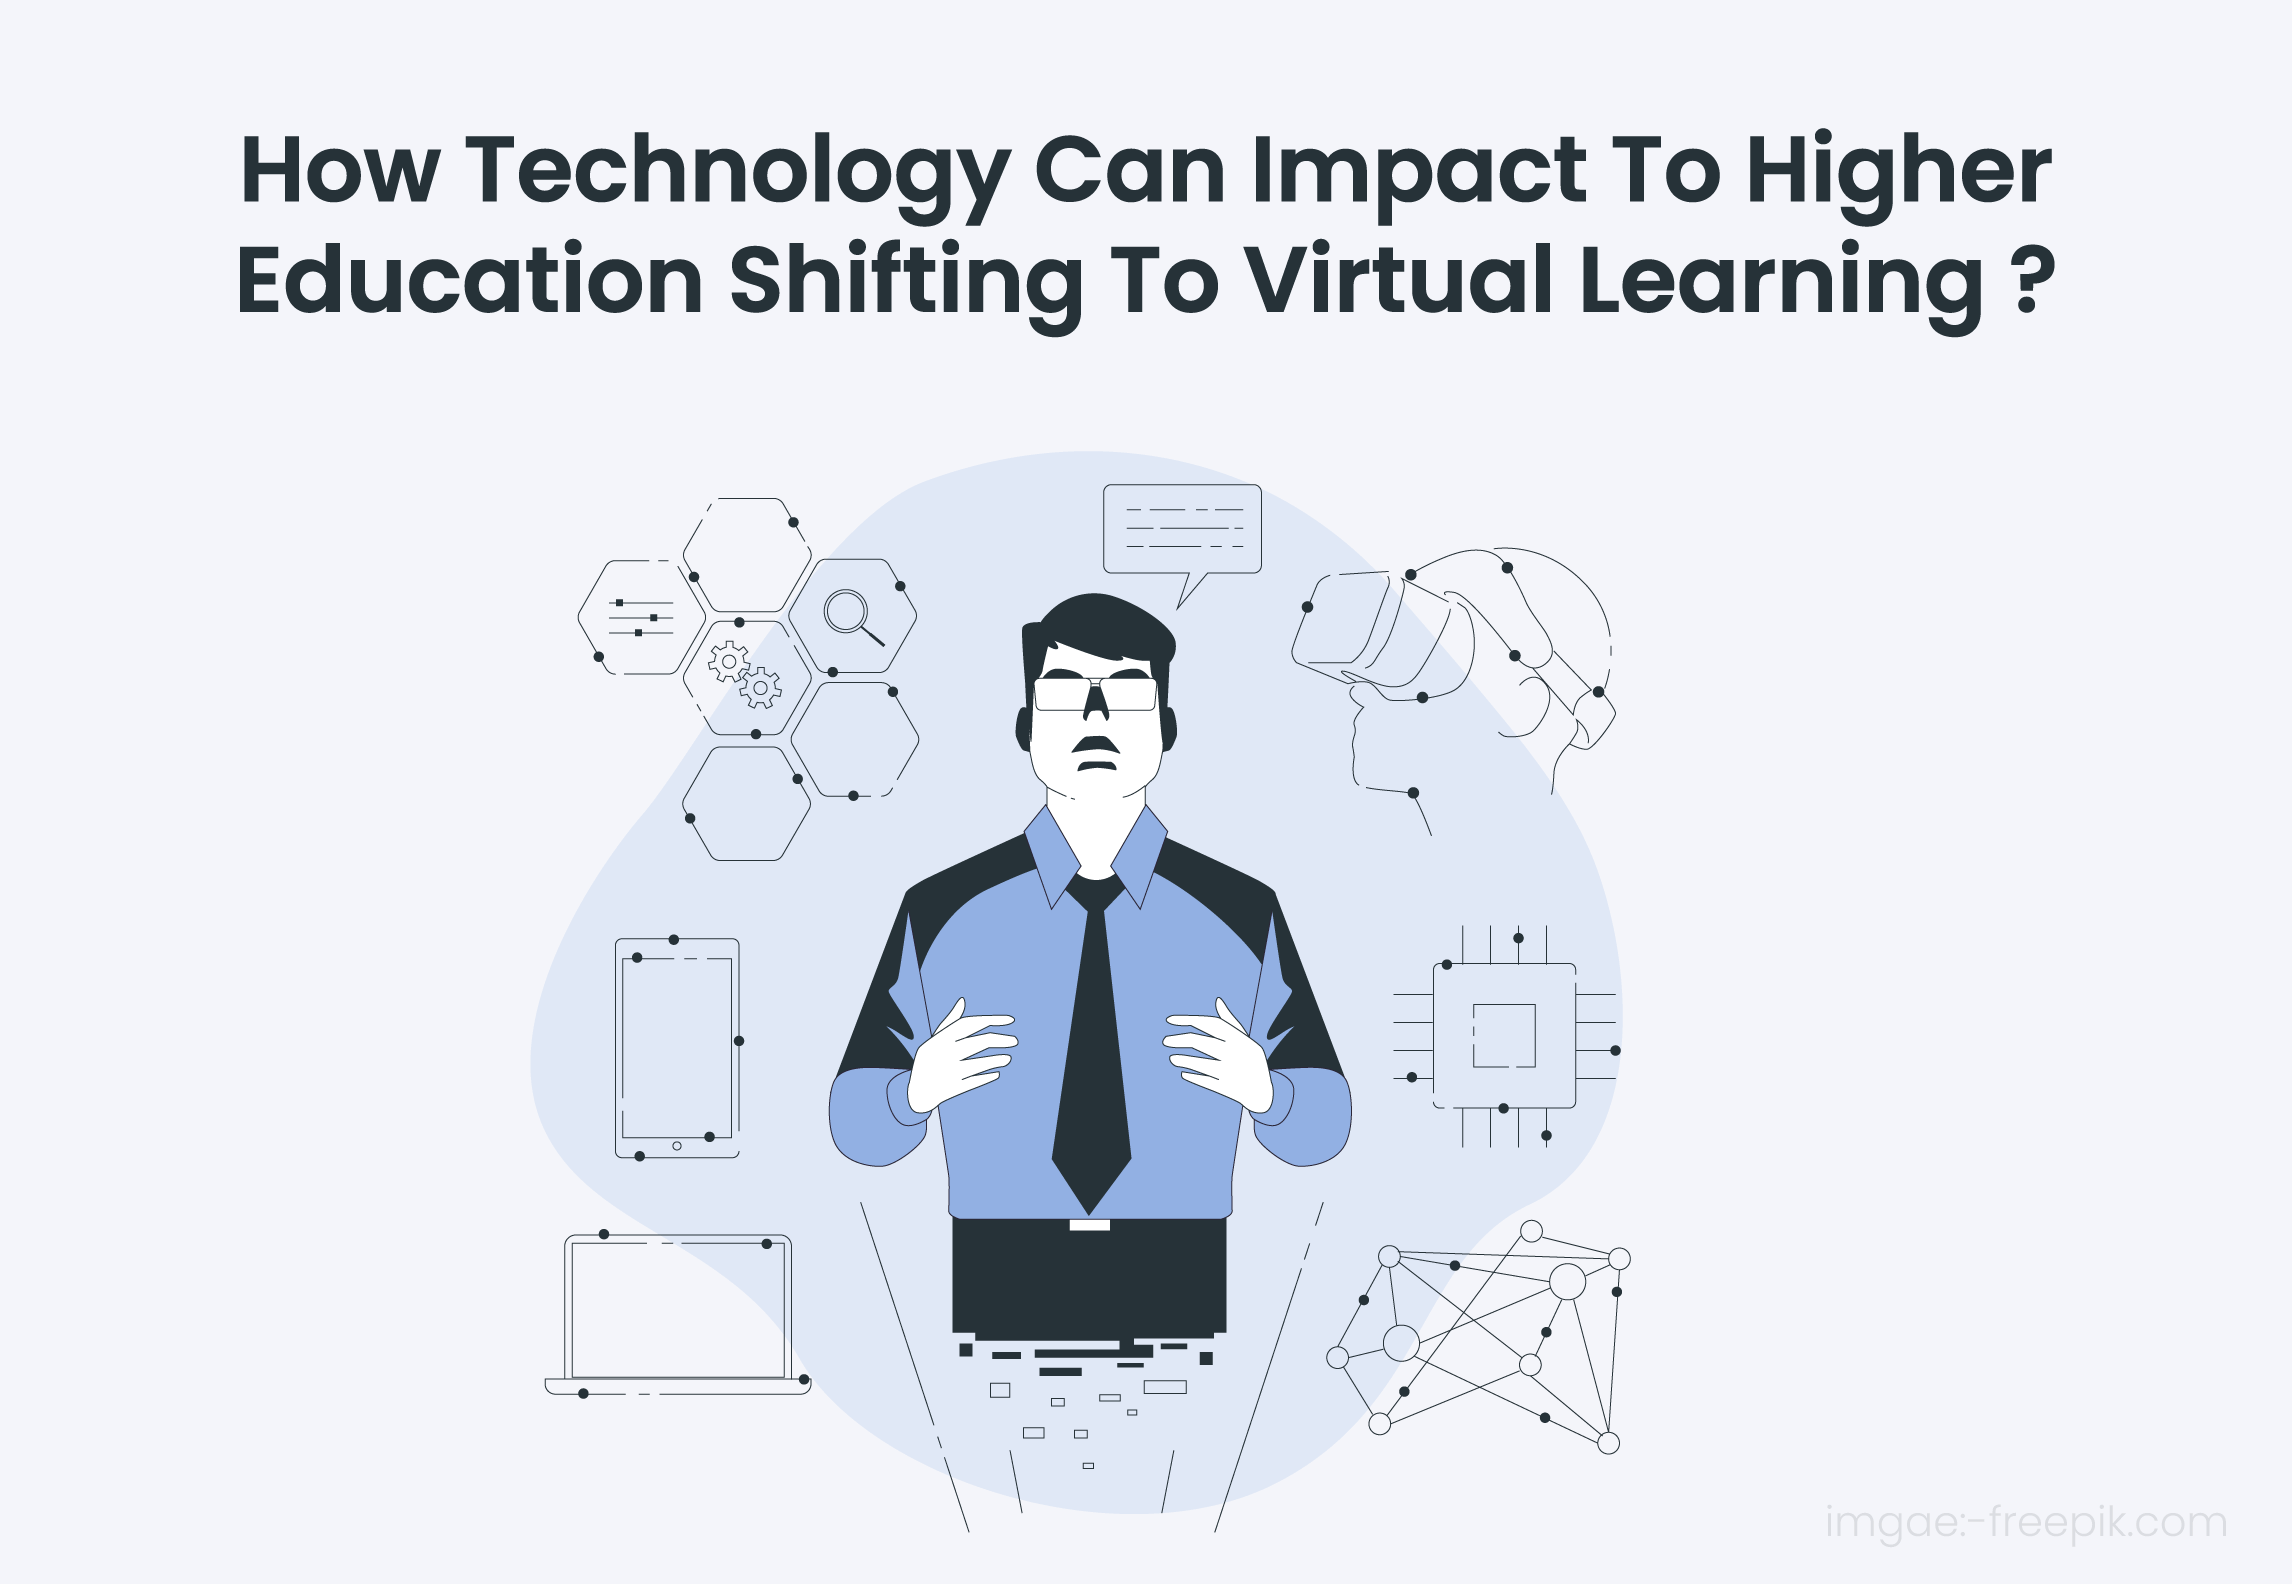 Higher Education Shifting To Virtual Learning